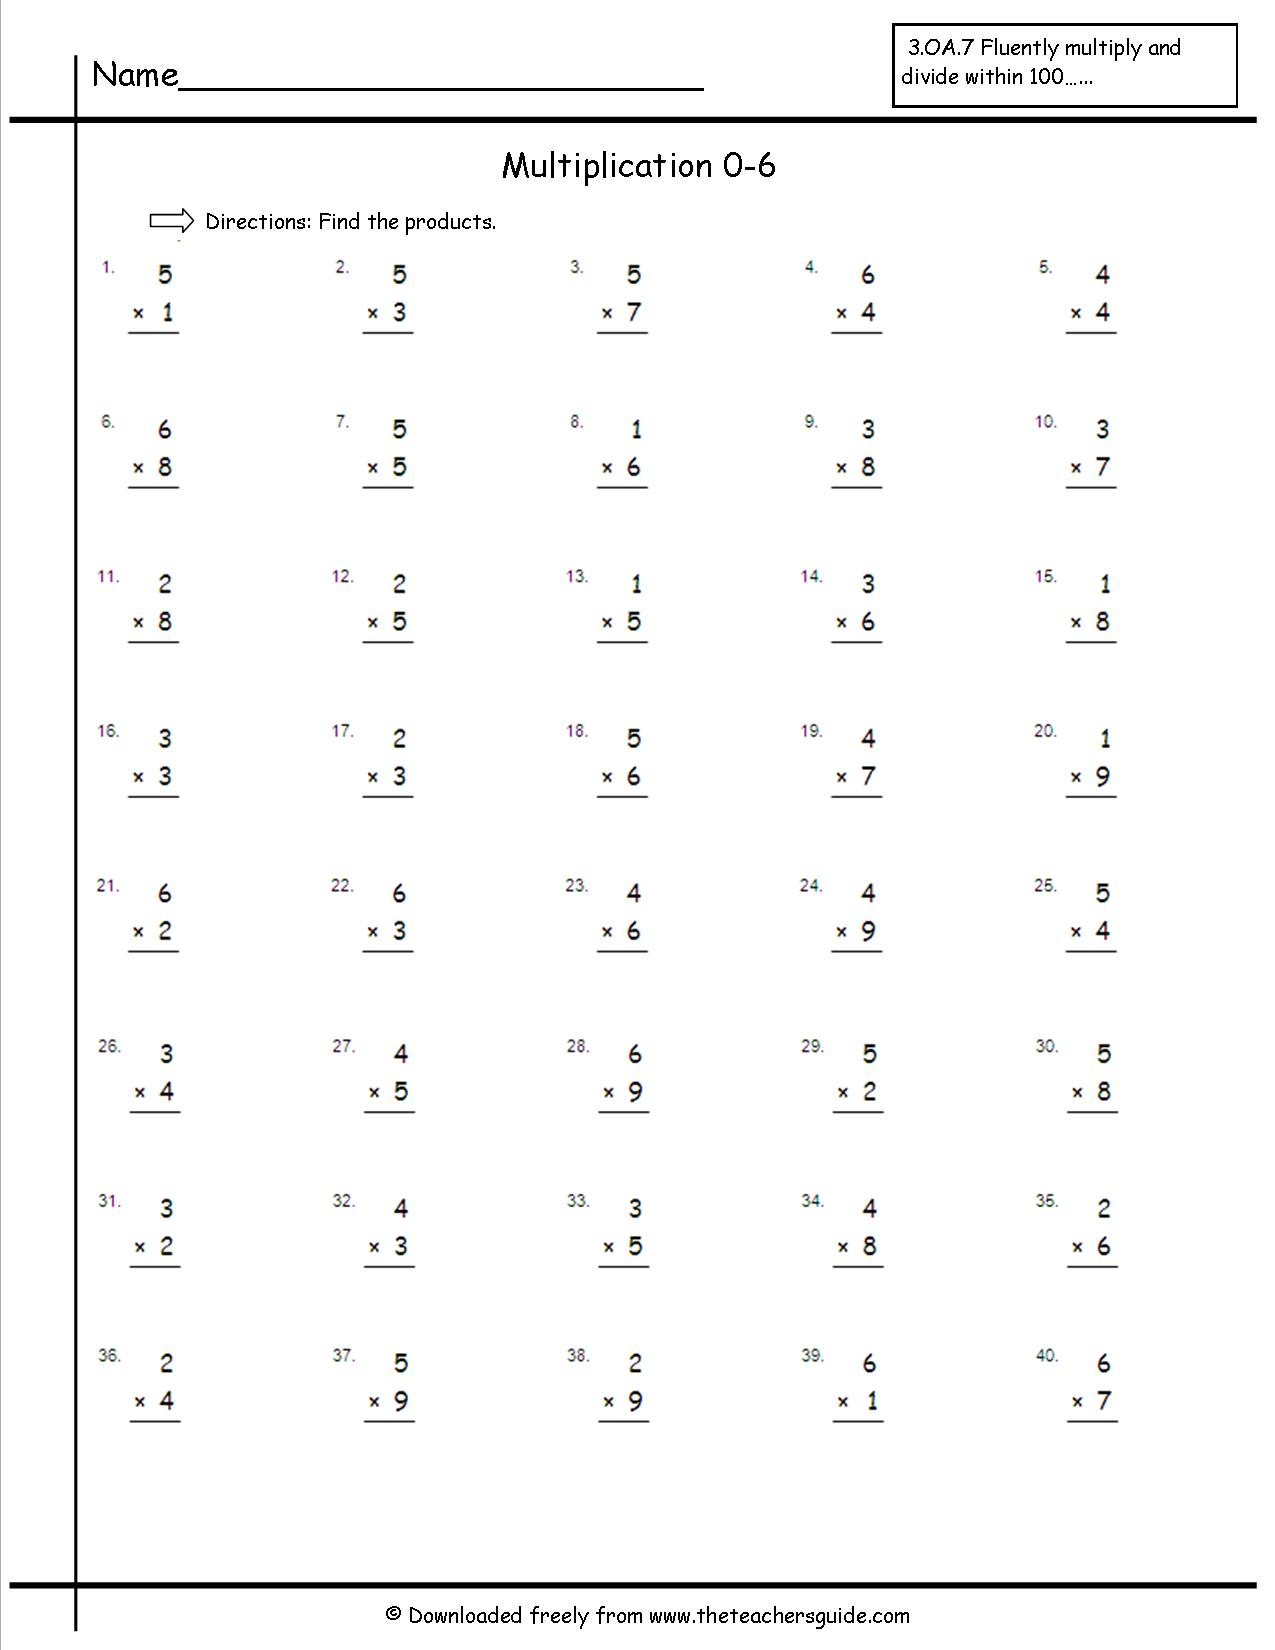 multiplication-facts-test-times-tables-worksheets-printable